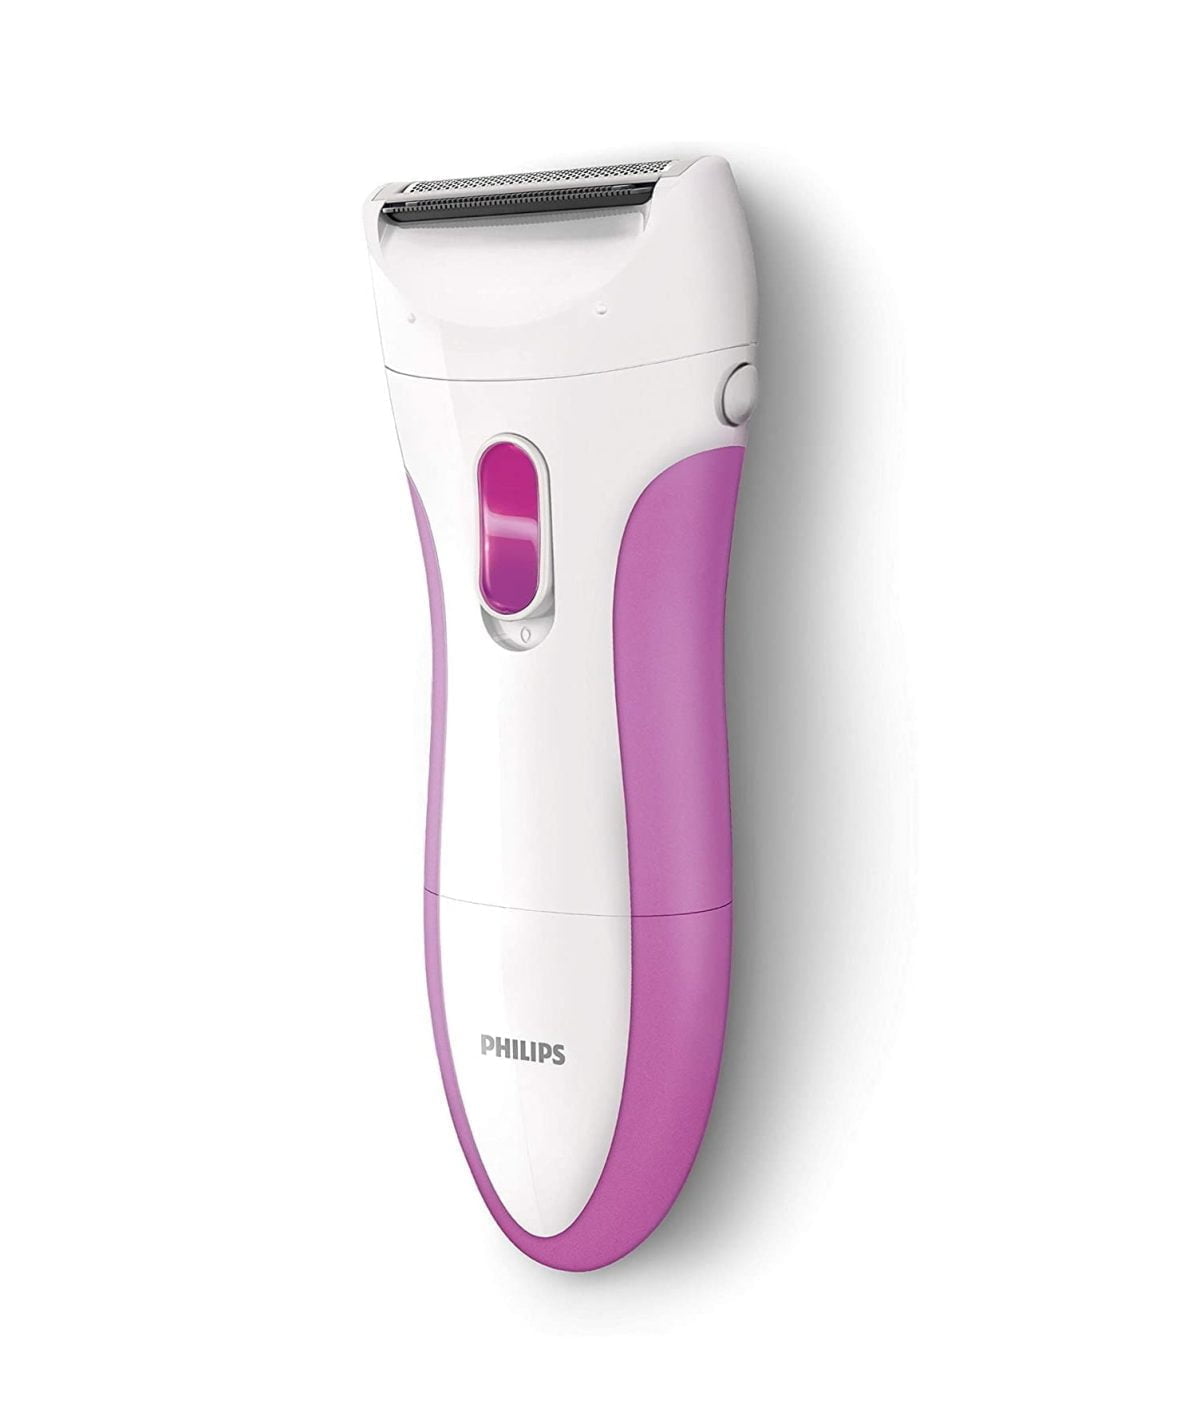 71H0Eeodal. Ac Sl1500 Philips &Lt;H1&Gt;Philips Hp6341 Lady Shaver - Wet &Amp; Dry&Lt;/H1&Gt; &Lt;P Class=&Quot;P-Heading-04-Large P-Heading-Bold P-Feature-Title&Quot;&Gt;Safe Shaving System For Ultimate Skin Protection The Gentle Small Shaving Head Protects Your Skin Leaving It Smooth And Soft Profiled, Ergonomic Grip For Comfortable Handling Wet &Amp; Dry For Use In Bath Or Shower For A Gentle And Comfortable Use During Your Shower Or Bath Routine With Anti Slip Grip For Optimal Wet &Amp; Dry Use.&Lt;/P&Gt; &Lt;Ul Class=&Quot;A-Unordered-List A-Vertical A-Spacing-Mini&Quot;&Gt; &Lt;Li&Gt;&Lt;Span Class=&Quot;A-List-Item&Quot;&Gt; Power Source:electric &Lt;/Span&Gt;&Lt;/Li&Gt; &Lt;Li&Gt;&Lt;Span Class=&Quot;A-List-Item&Quot;&Gt; Type:foil Shavers &Lt;/Span&Gt;&Lt;/Li&Gt; &Lt;Li&Gt;&Lt;Span Class=&Quot;A-List-Item&Quot;&Gt; Operating Function:dry &Lt;/Span&Gt;&Lt;/Li&Gt; &Lt;/Ul&Gt; Philips Hp6341 Lady Shaver Philips Hp6341 Lady Shaver - Wet And Dry